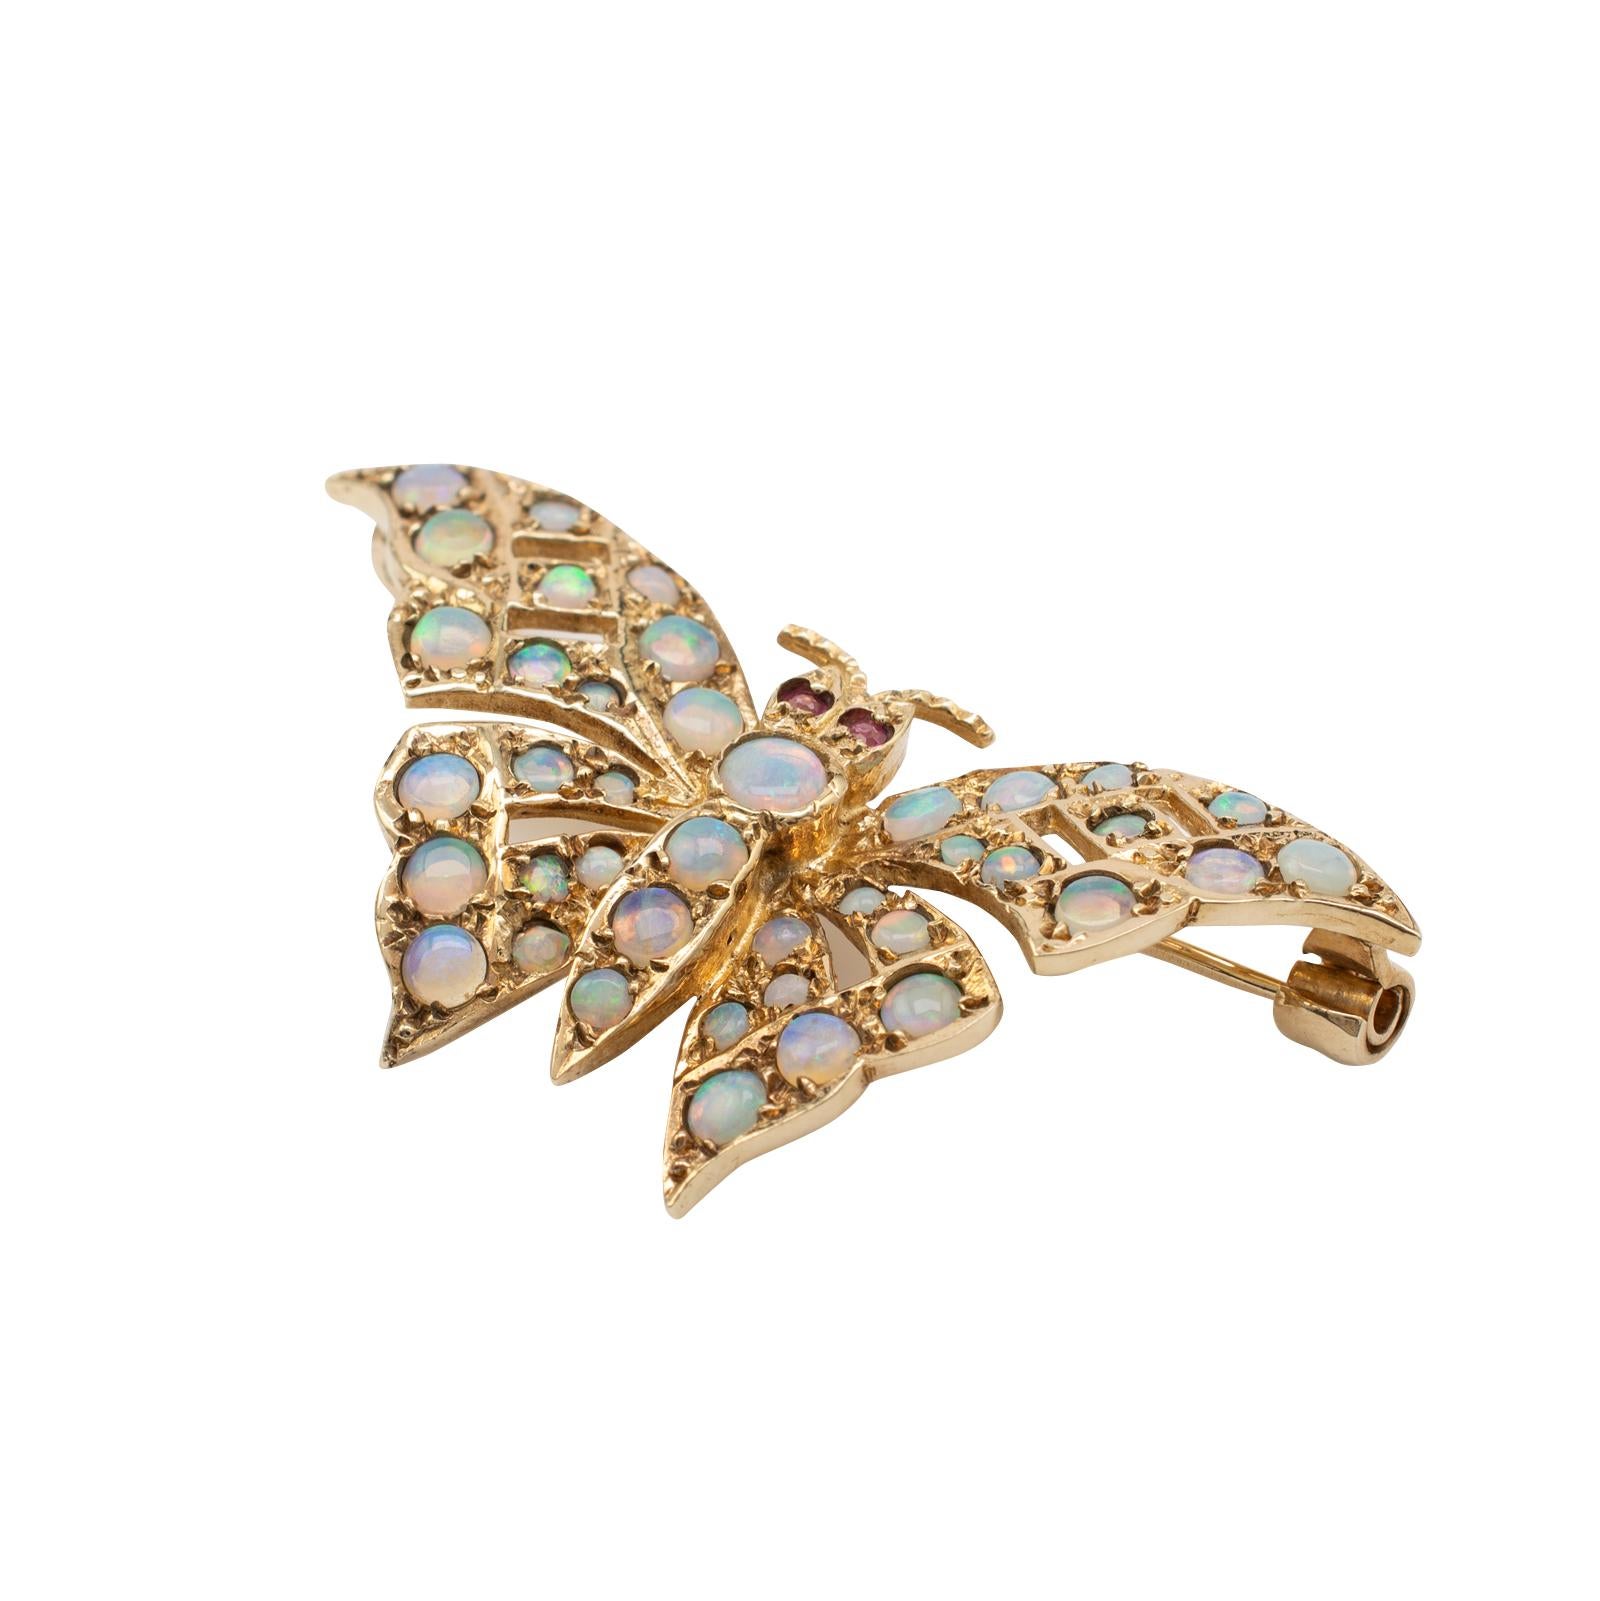 This beautiful vintage gold butterfly brooch, decorated with natural opals is hallmarked London 1985.

The butterfly is realistically sized and looks great adorned into a jacket lapel. The open pierce work gold is ornamented with various sized